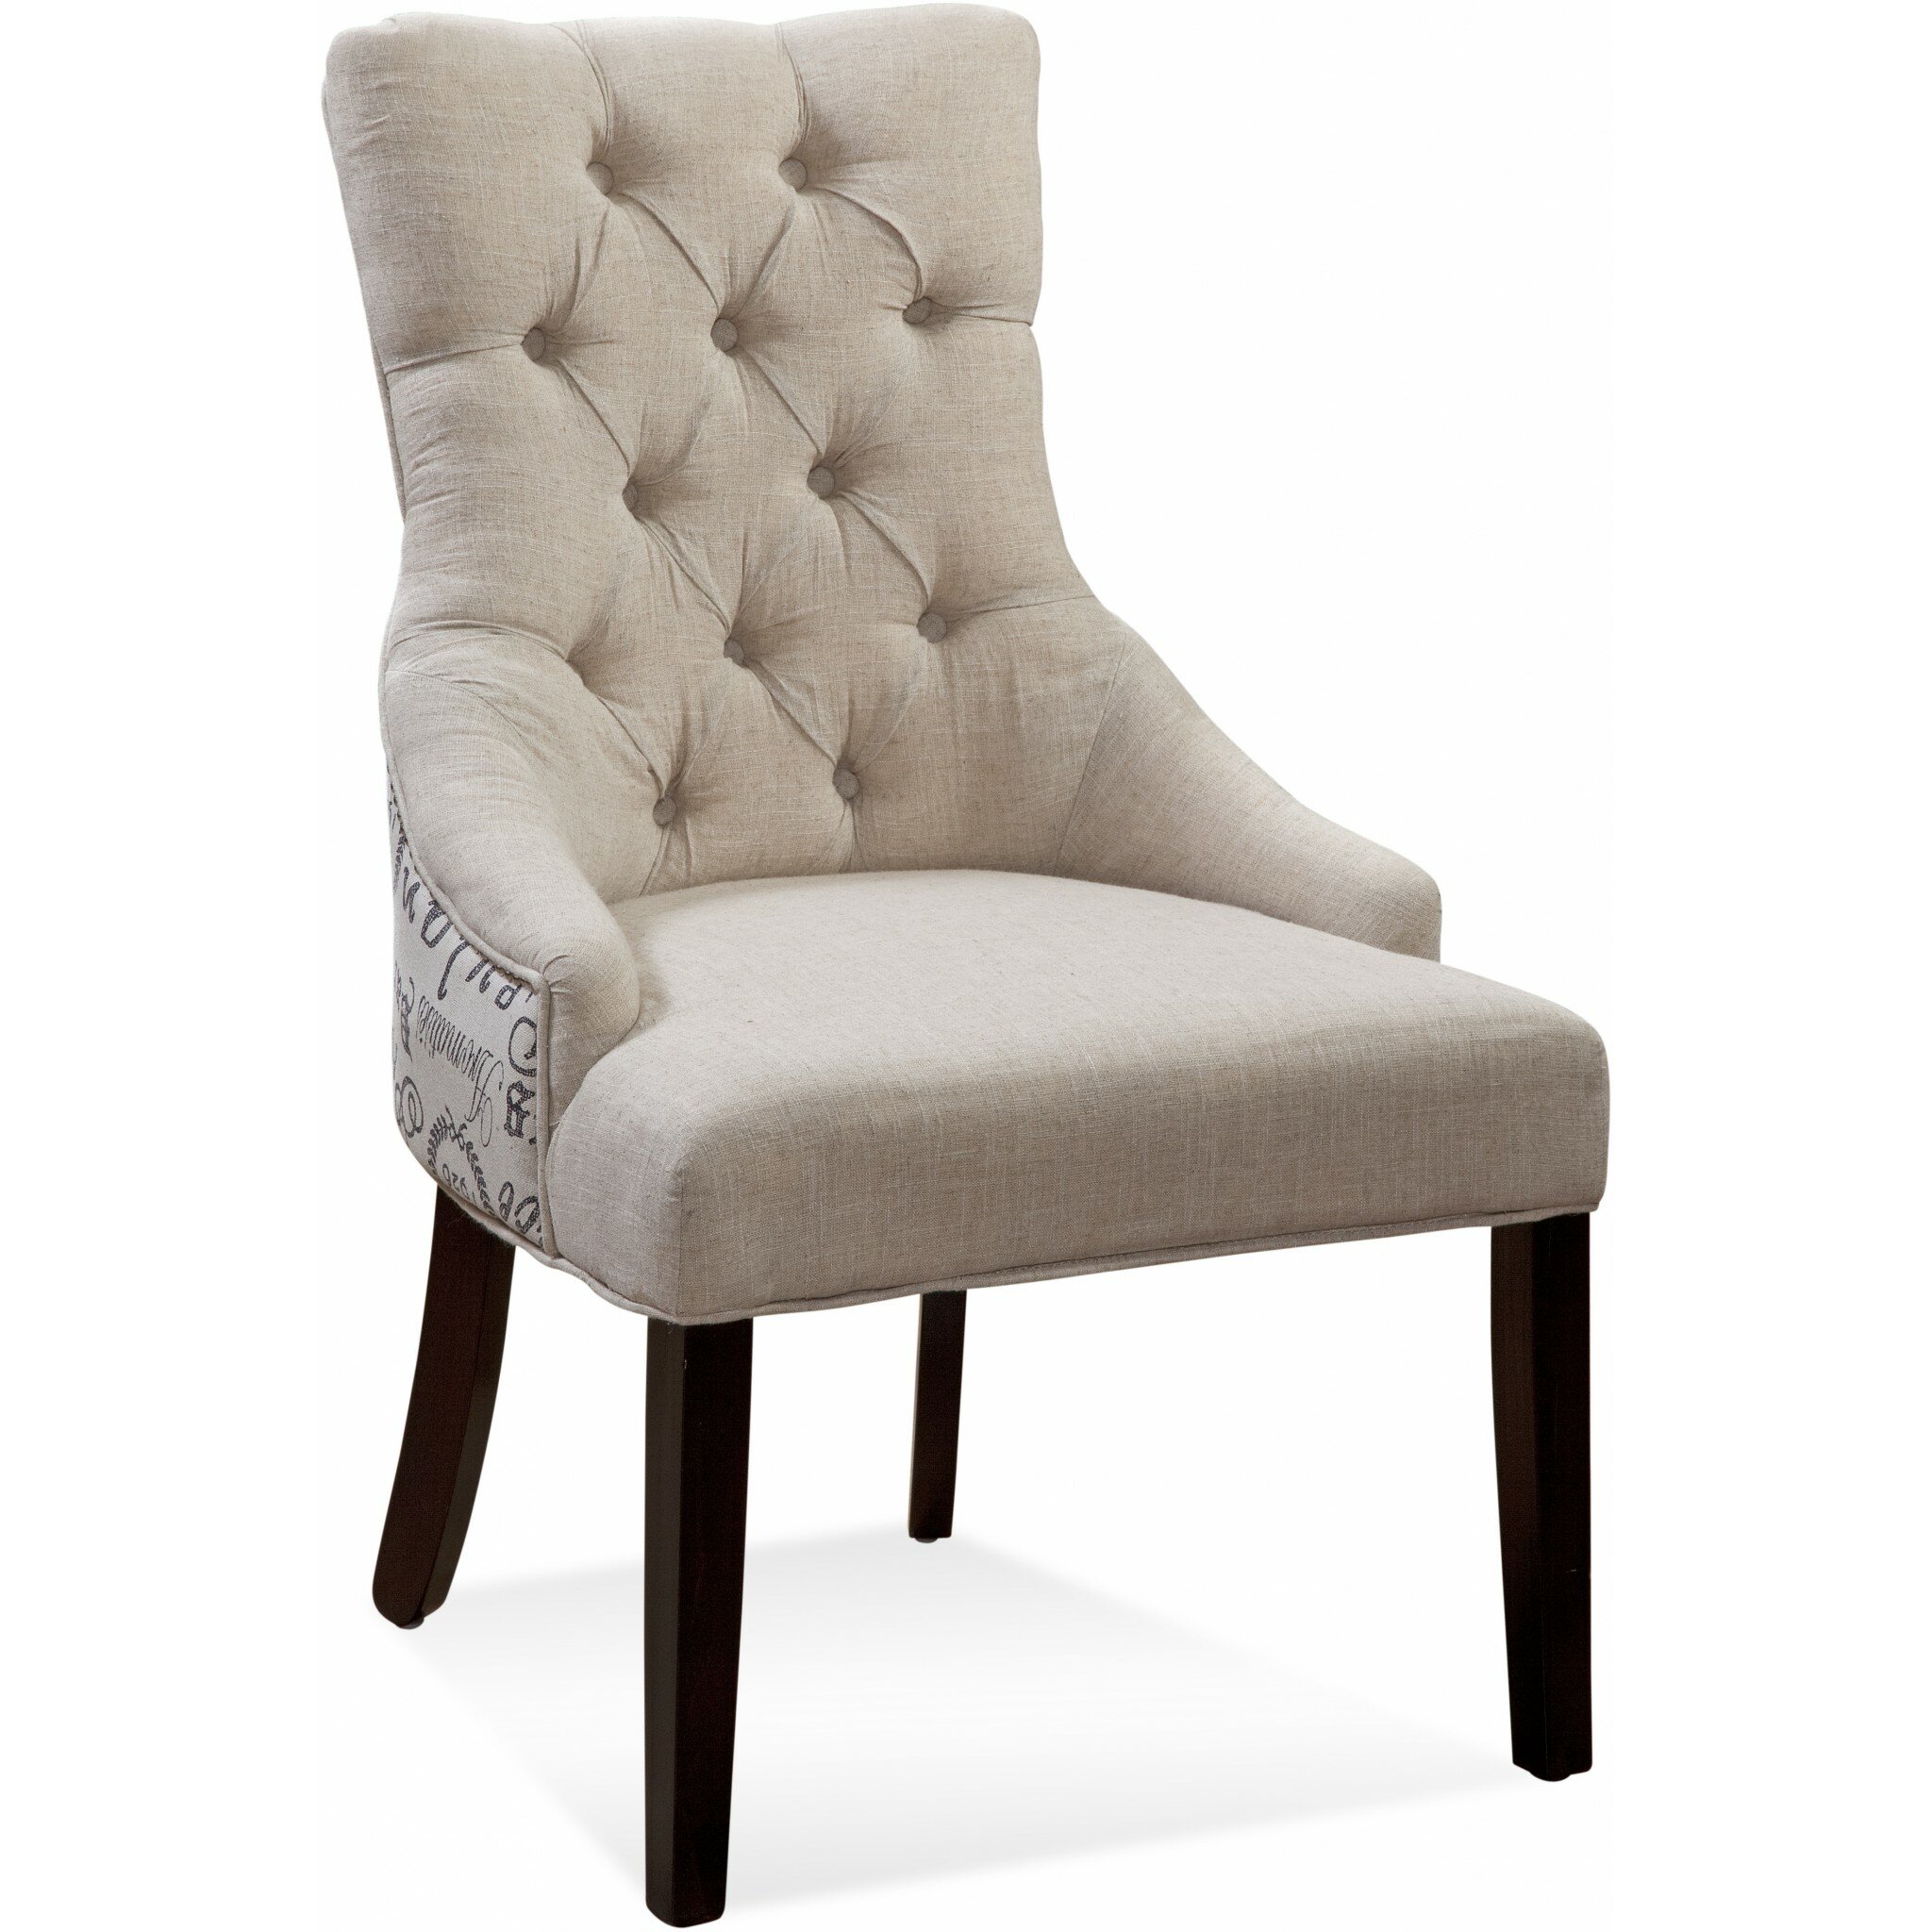 Darby Home Co Ahearn Tufted Linen Parsons Chair In Espresso